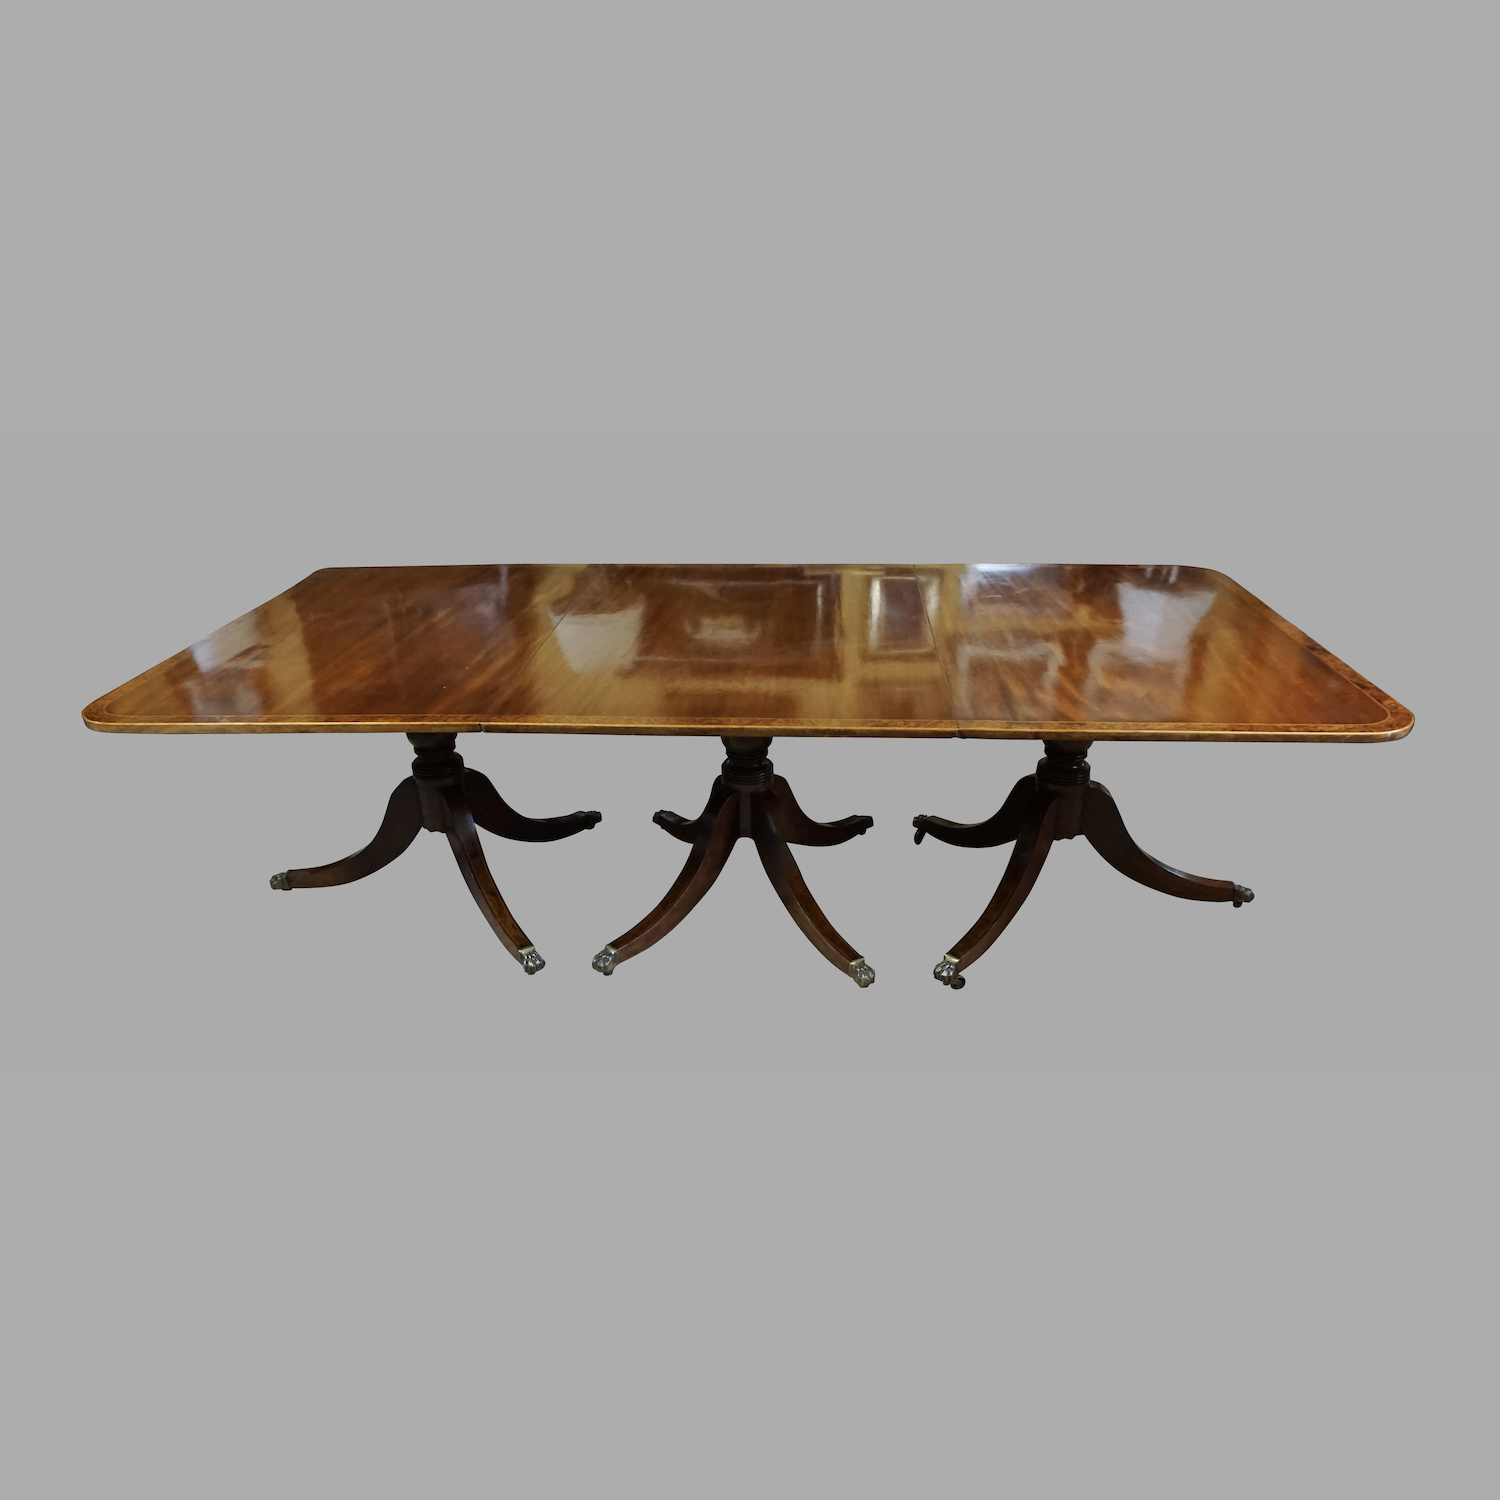 georgian-style-burl-elm-crossbanded-mahogany-3-pedestal-dining-table-with-leaves-c523-14